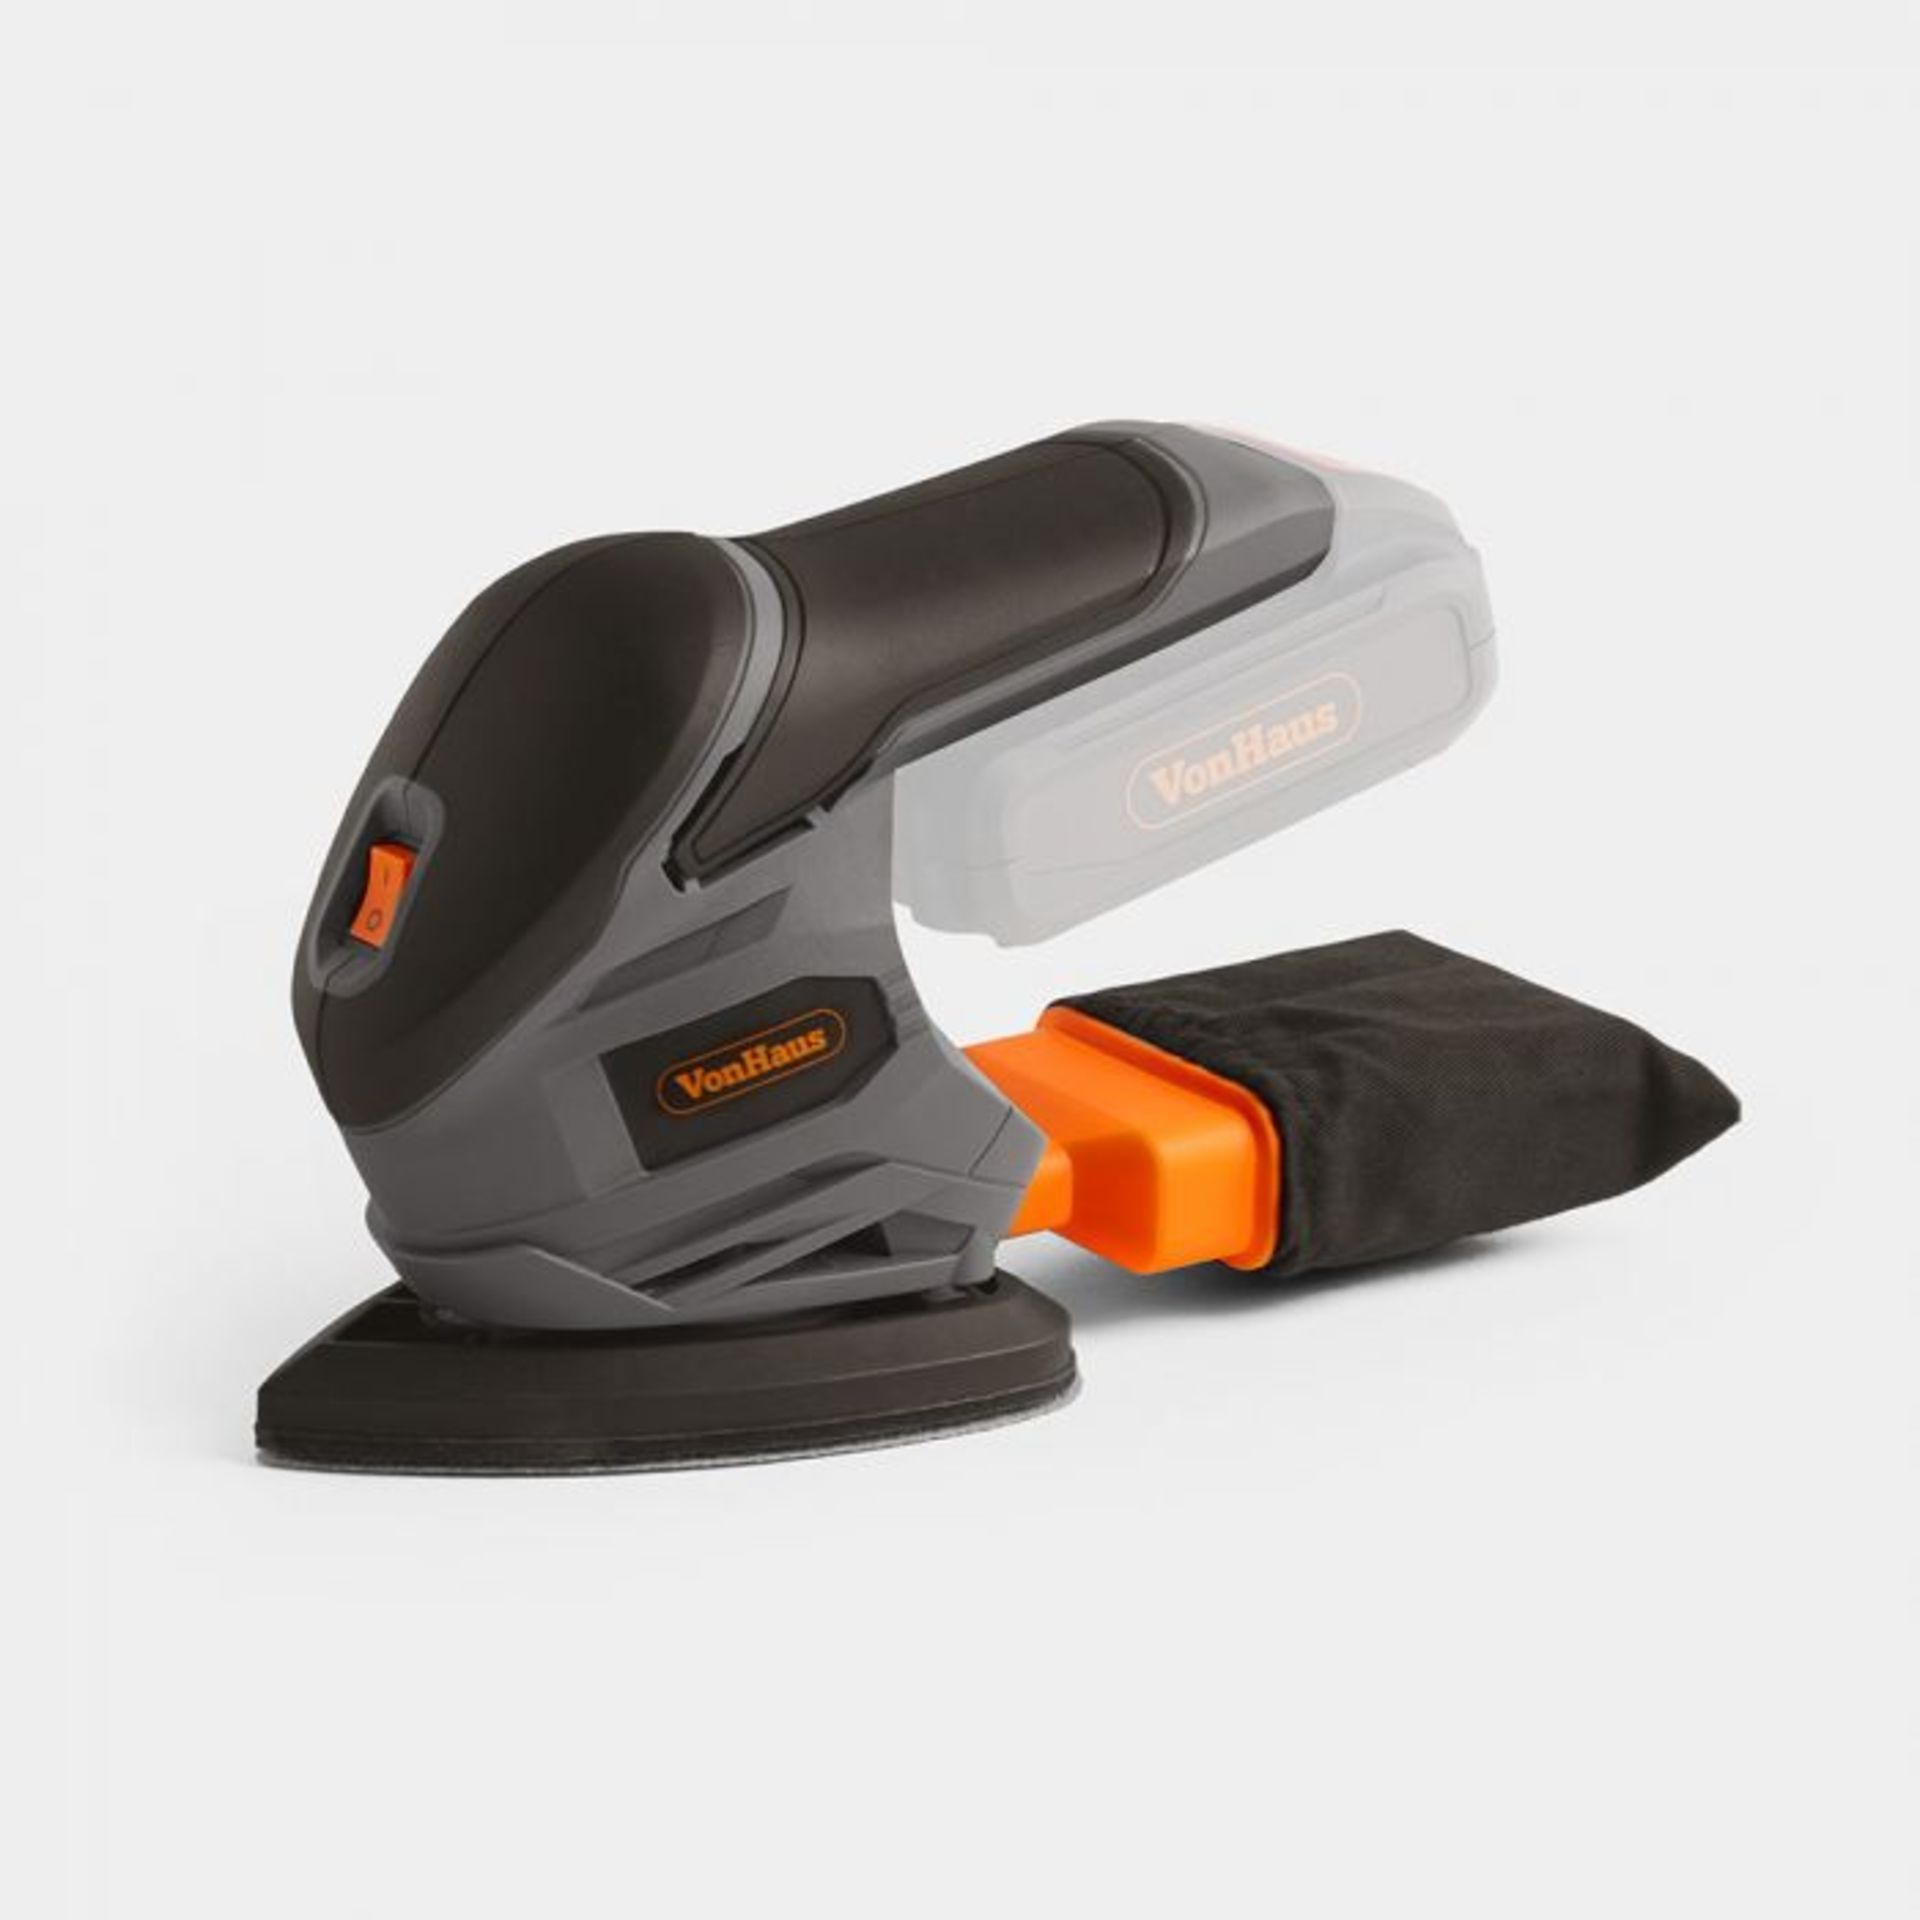 E-Series Cordless Sander. Suitable for use on wood, plastics and metal, the Sander lends a helping